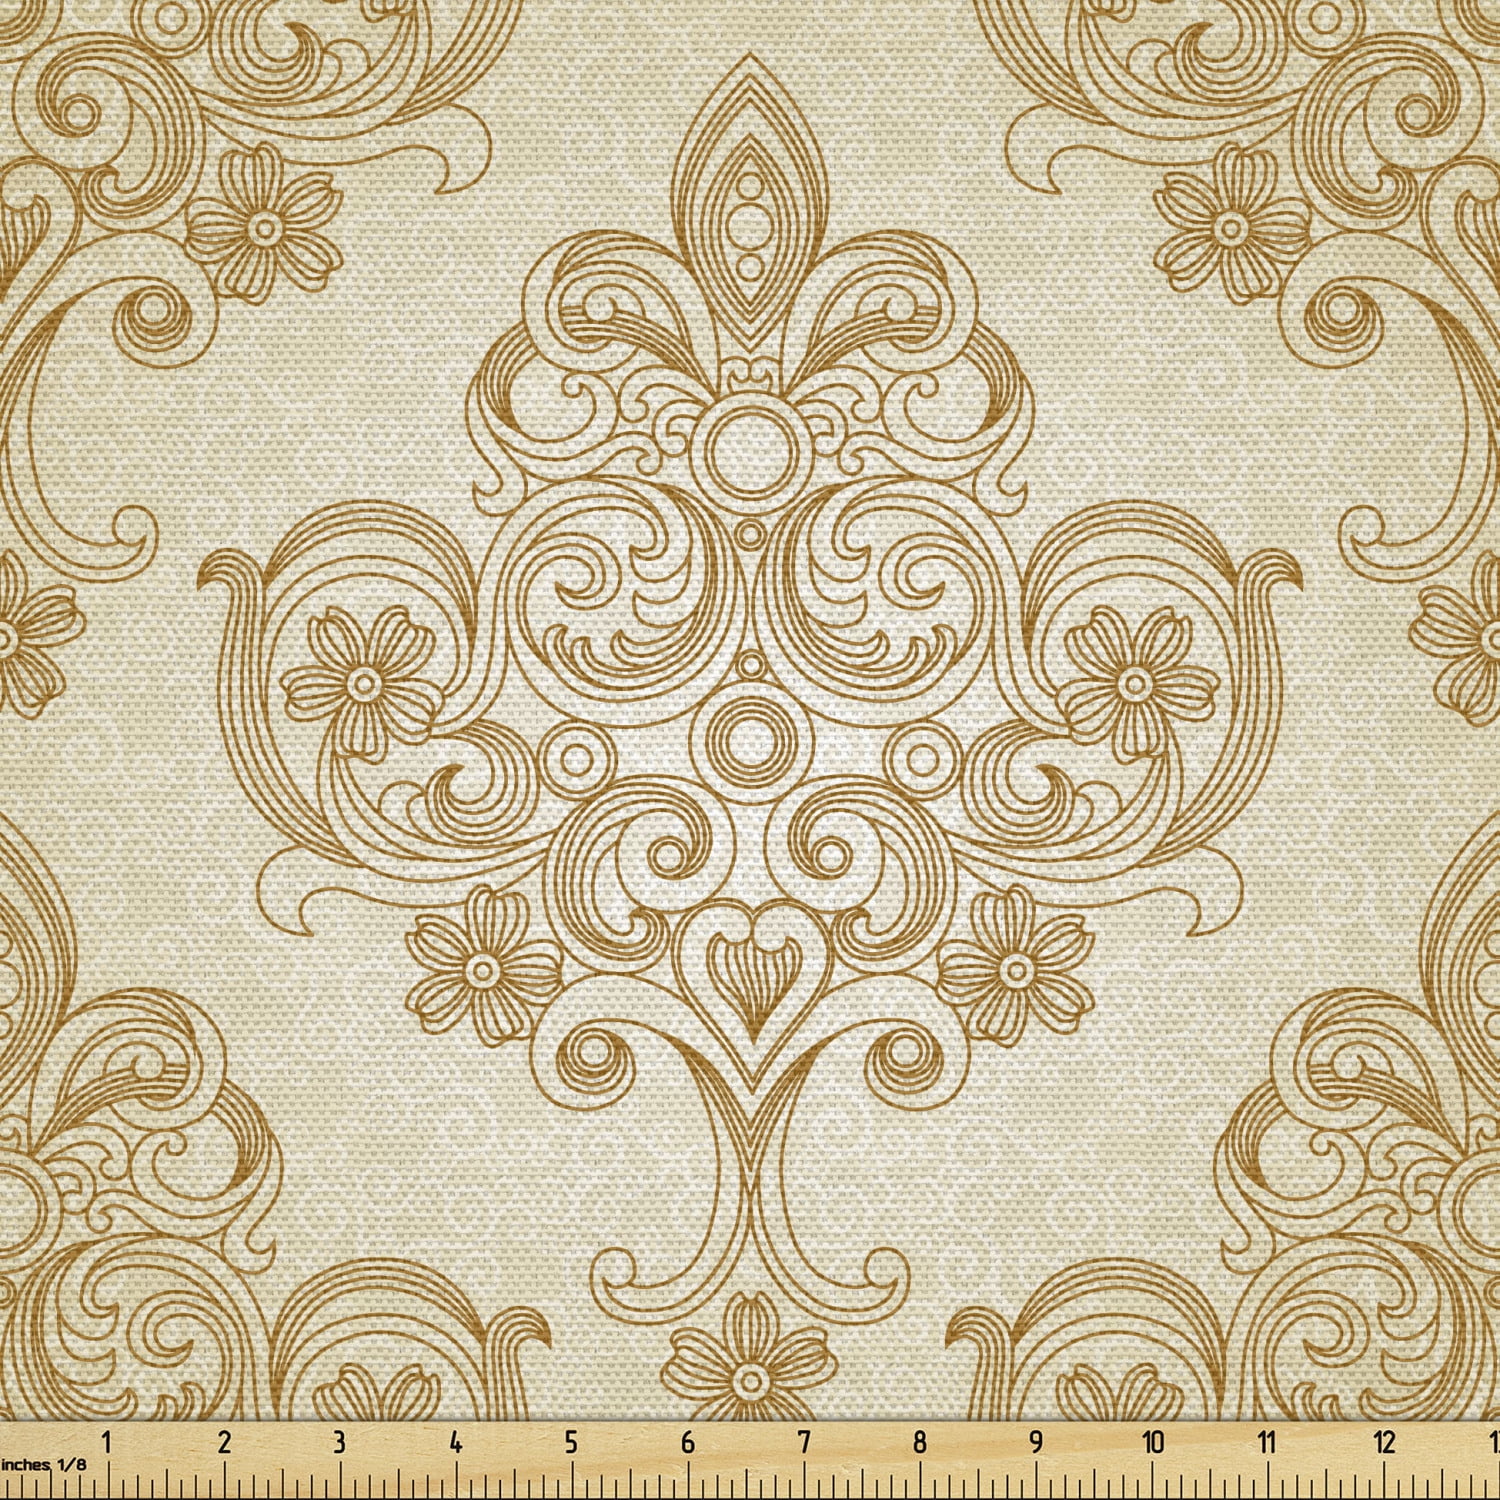 Ivory Fabric By The Yard Vintage Baroque Pattern With Curved Flower Lines Rococo Style Ornate Art Decorative Upholstery Fabric For Chairs Home Accents Cream Pale Brown By Ambesonne Walmart Com